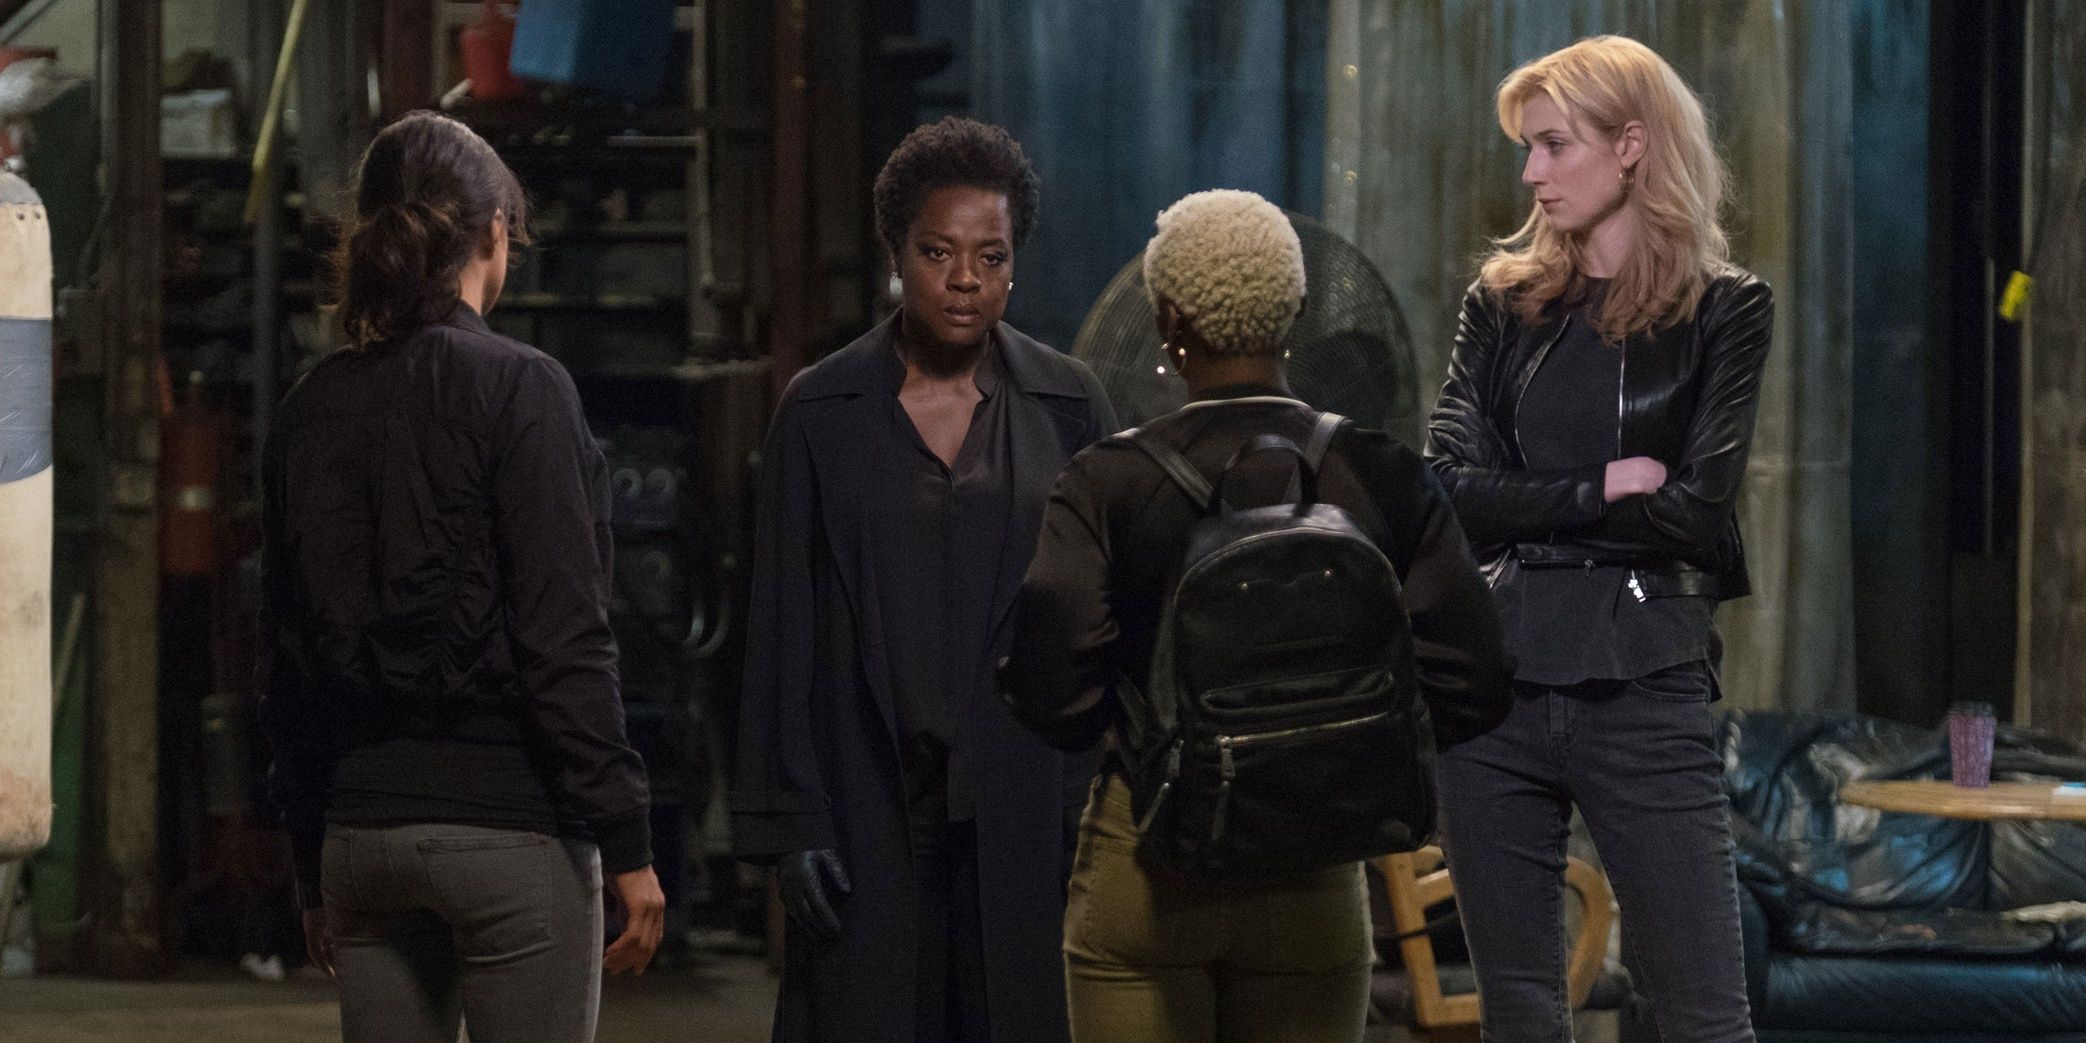 The main cast of the movie Widows talking in a dilapidated space.